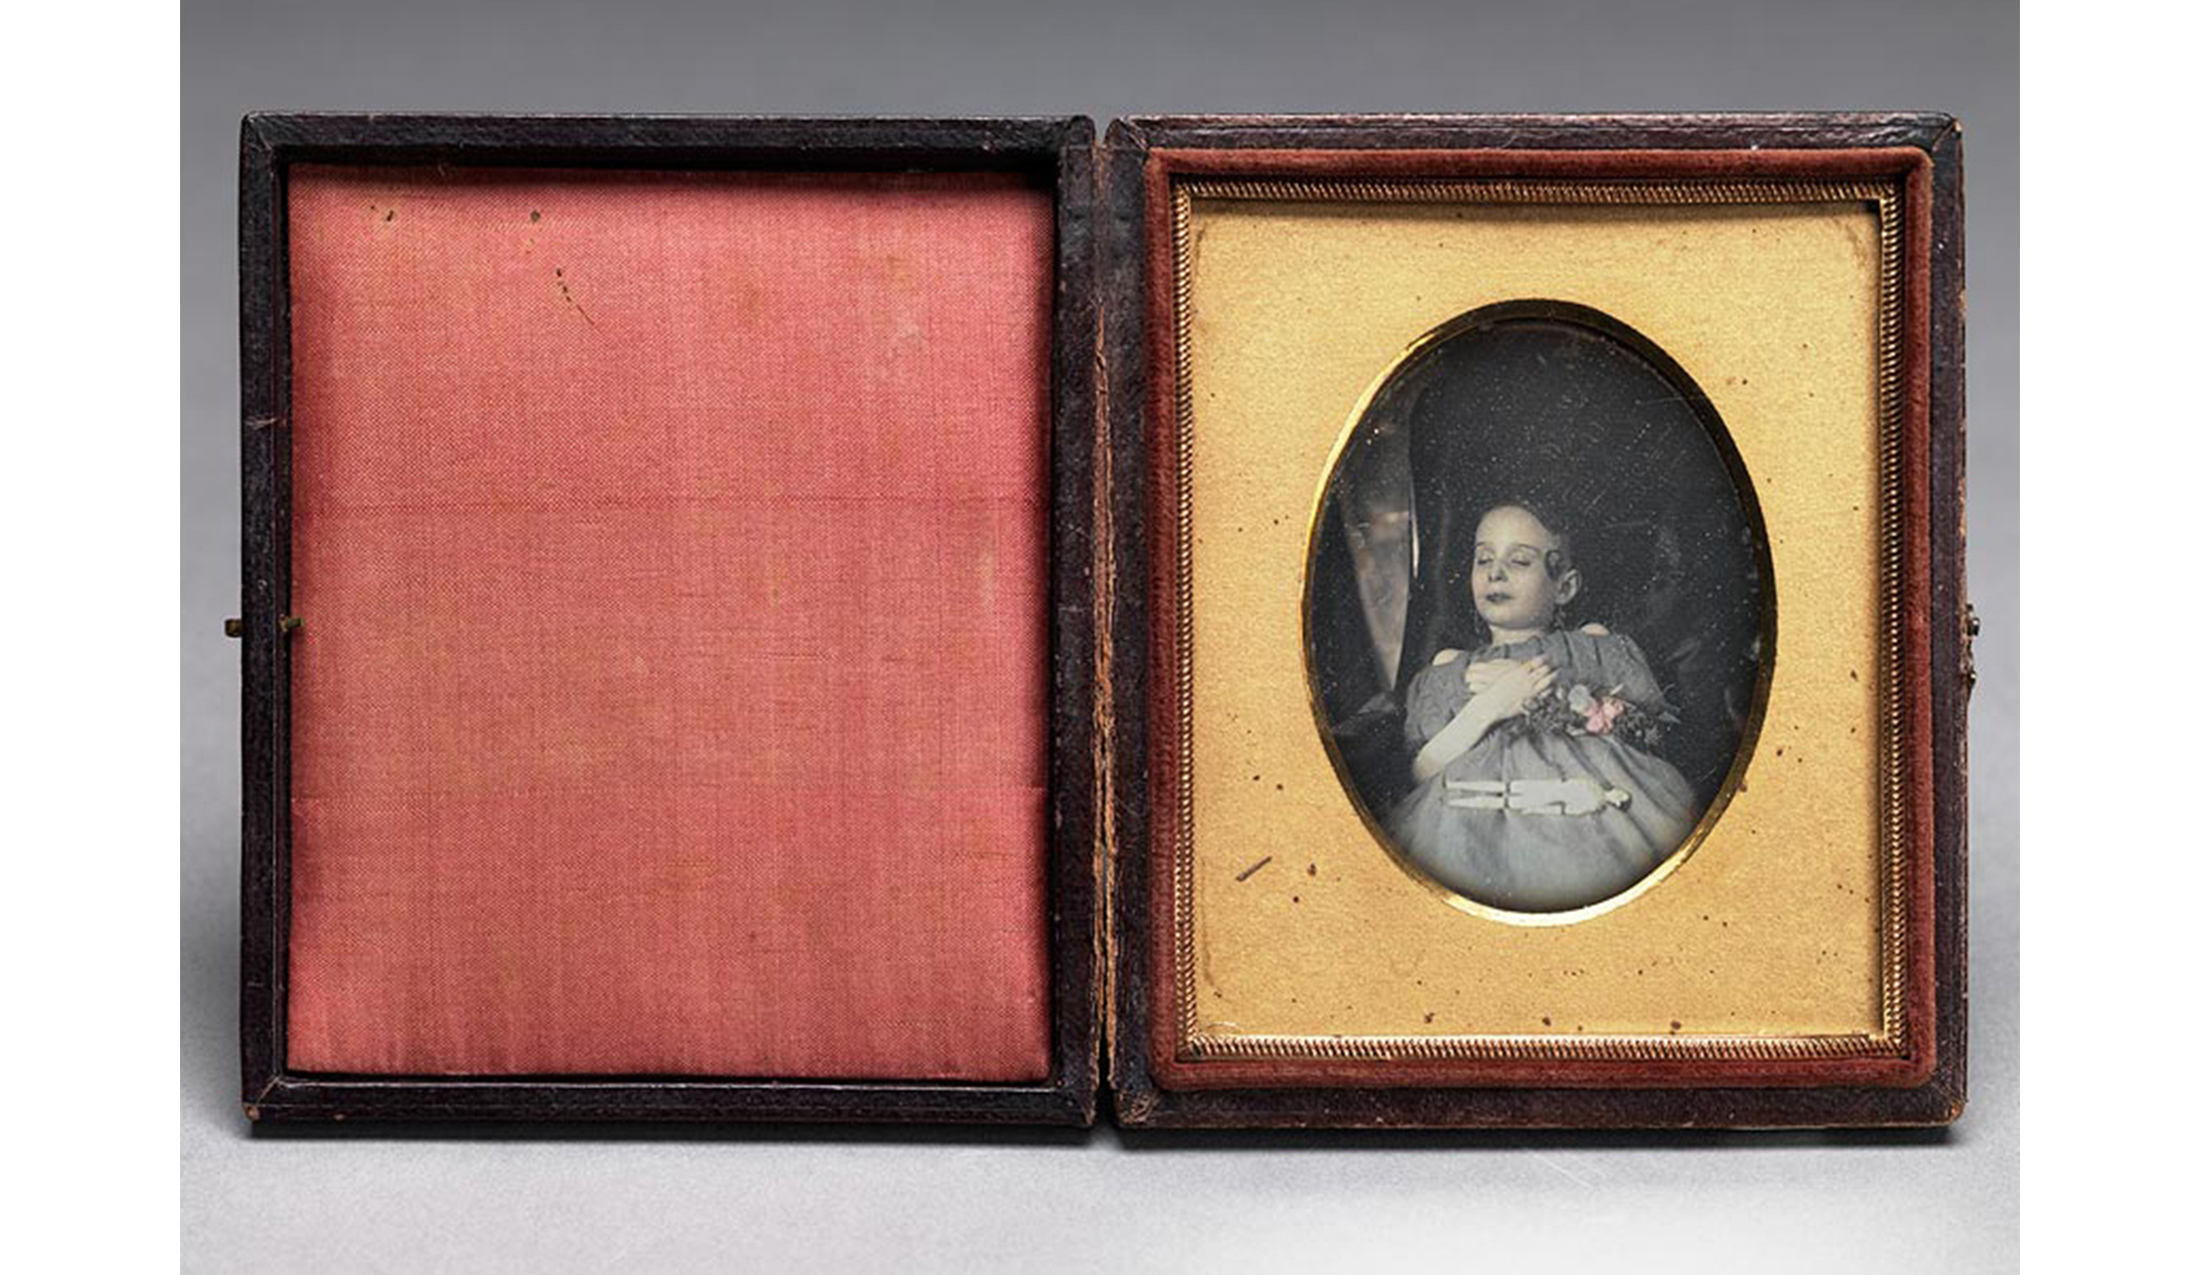 brown leather tooled case with metal clasp, pink silk inside cover, plain gold mat around oval image of dead deceased girl; child with hands folded over chest in hand painted blue dress, hand colored flowers over her proper left arm and small jointed doll laying on her dress